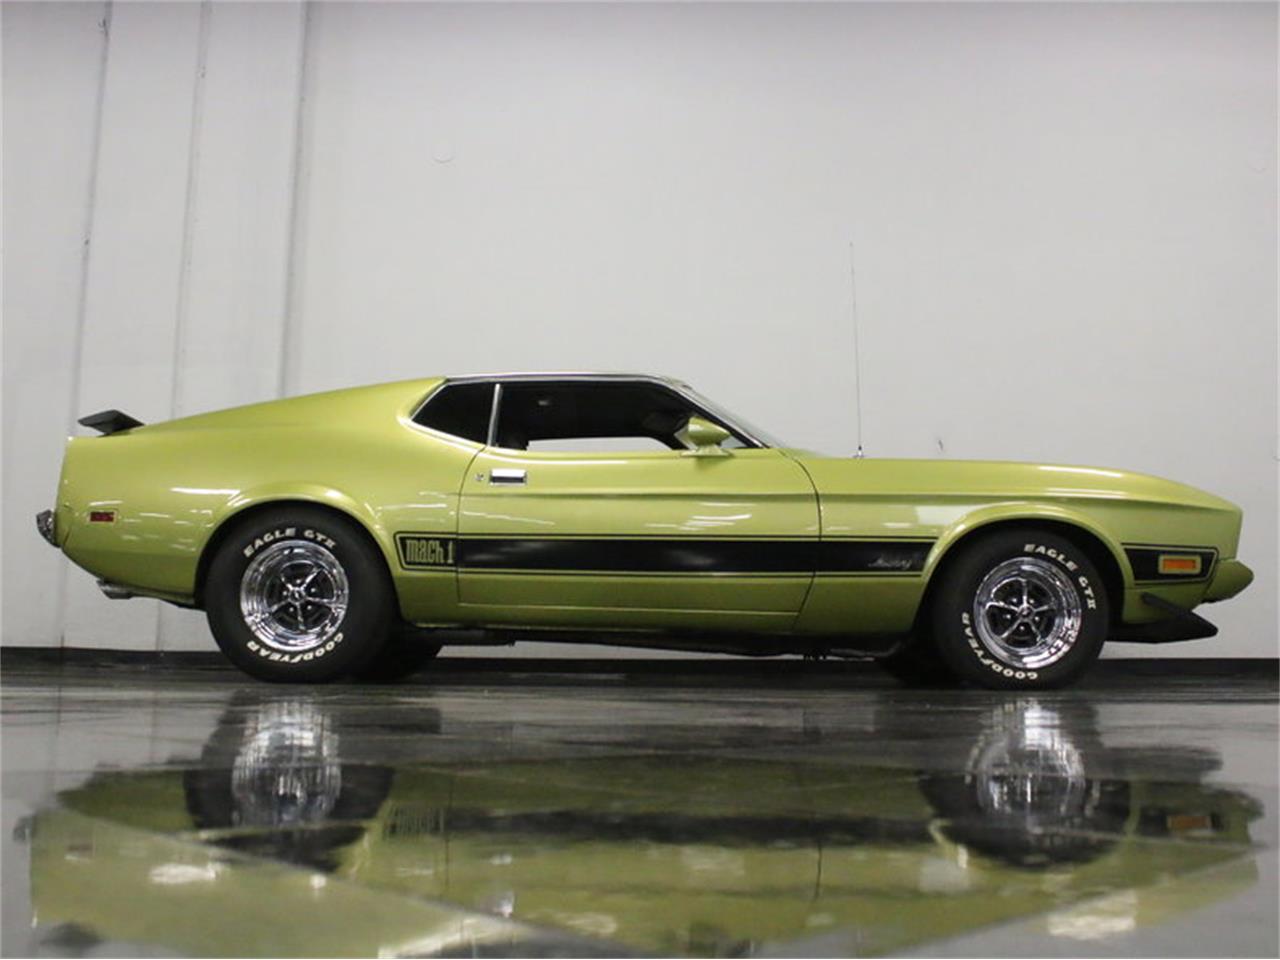 1973 Ford Mustang Mach 1 for Sale | ClassicCars.com | CC-982874